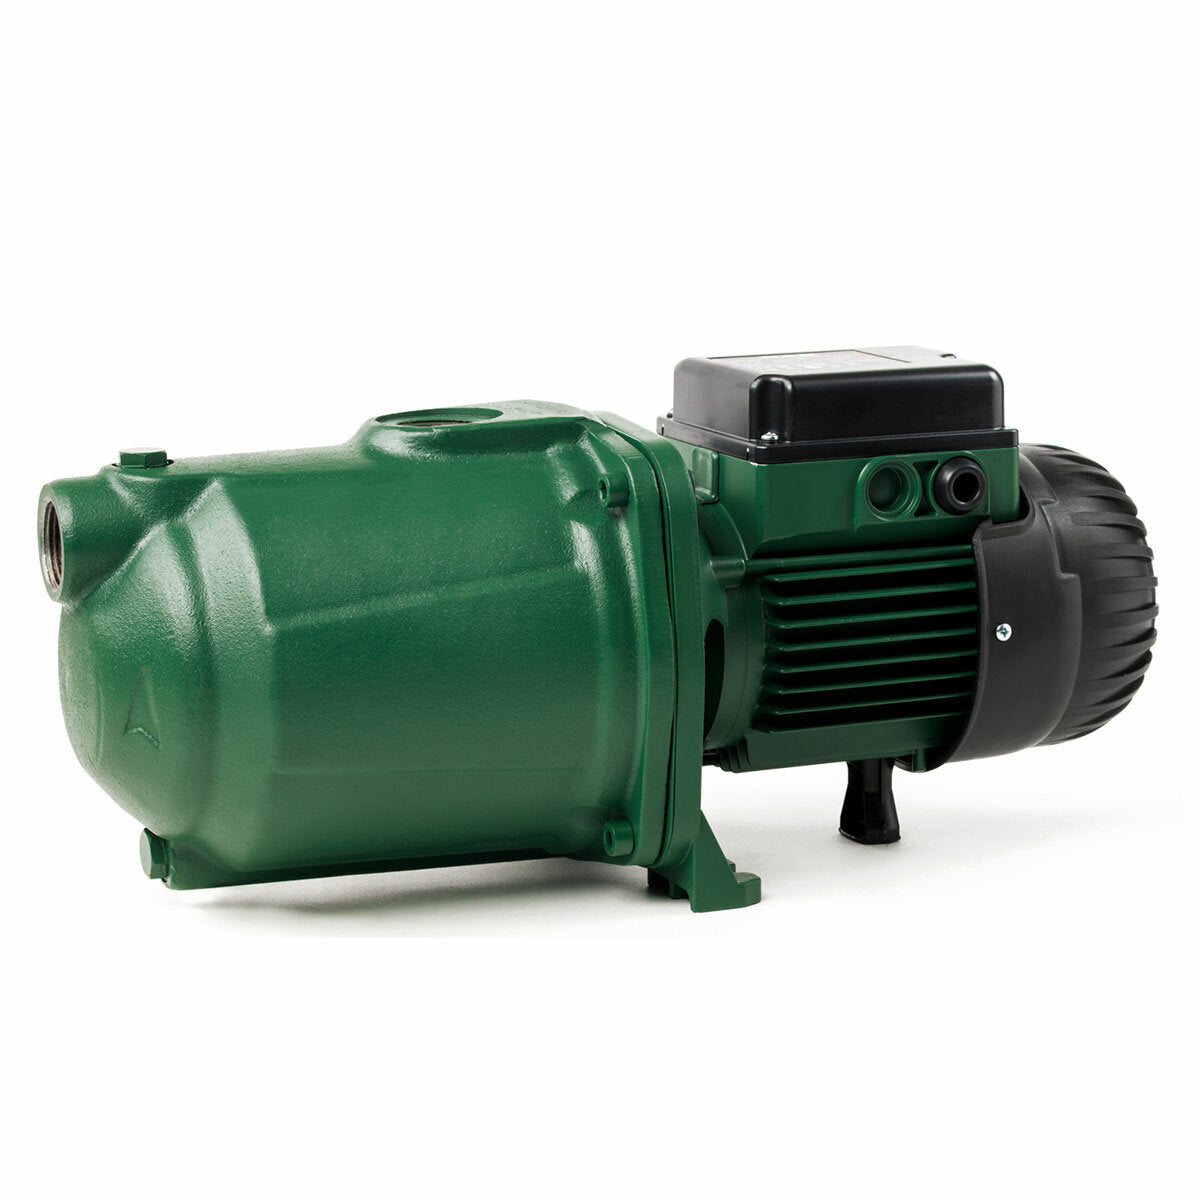 EURO 40/80 M IE2 single-phase multistage centrifugal DAB surface pump